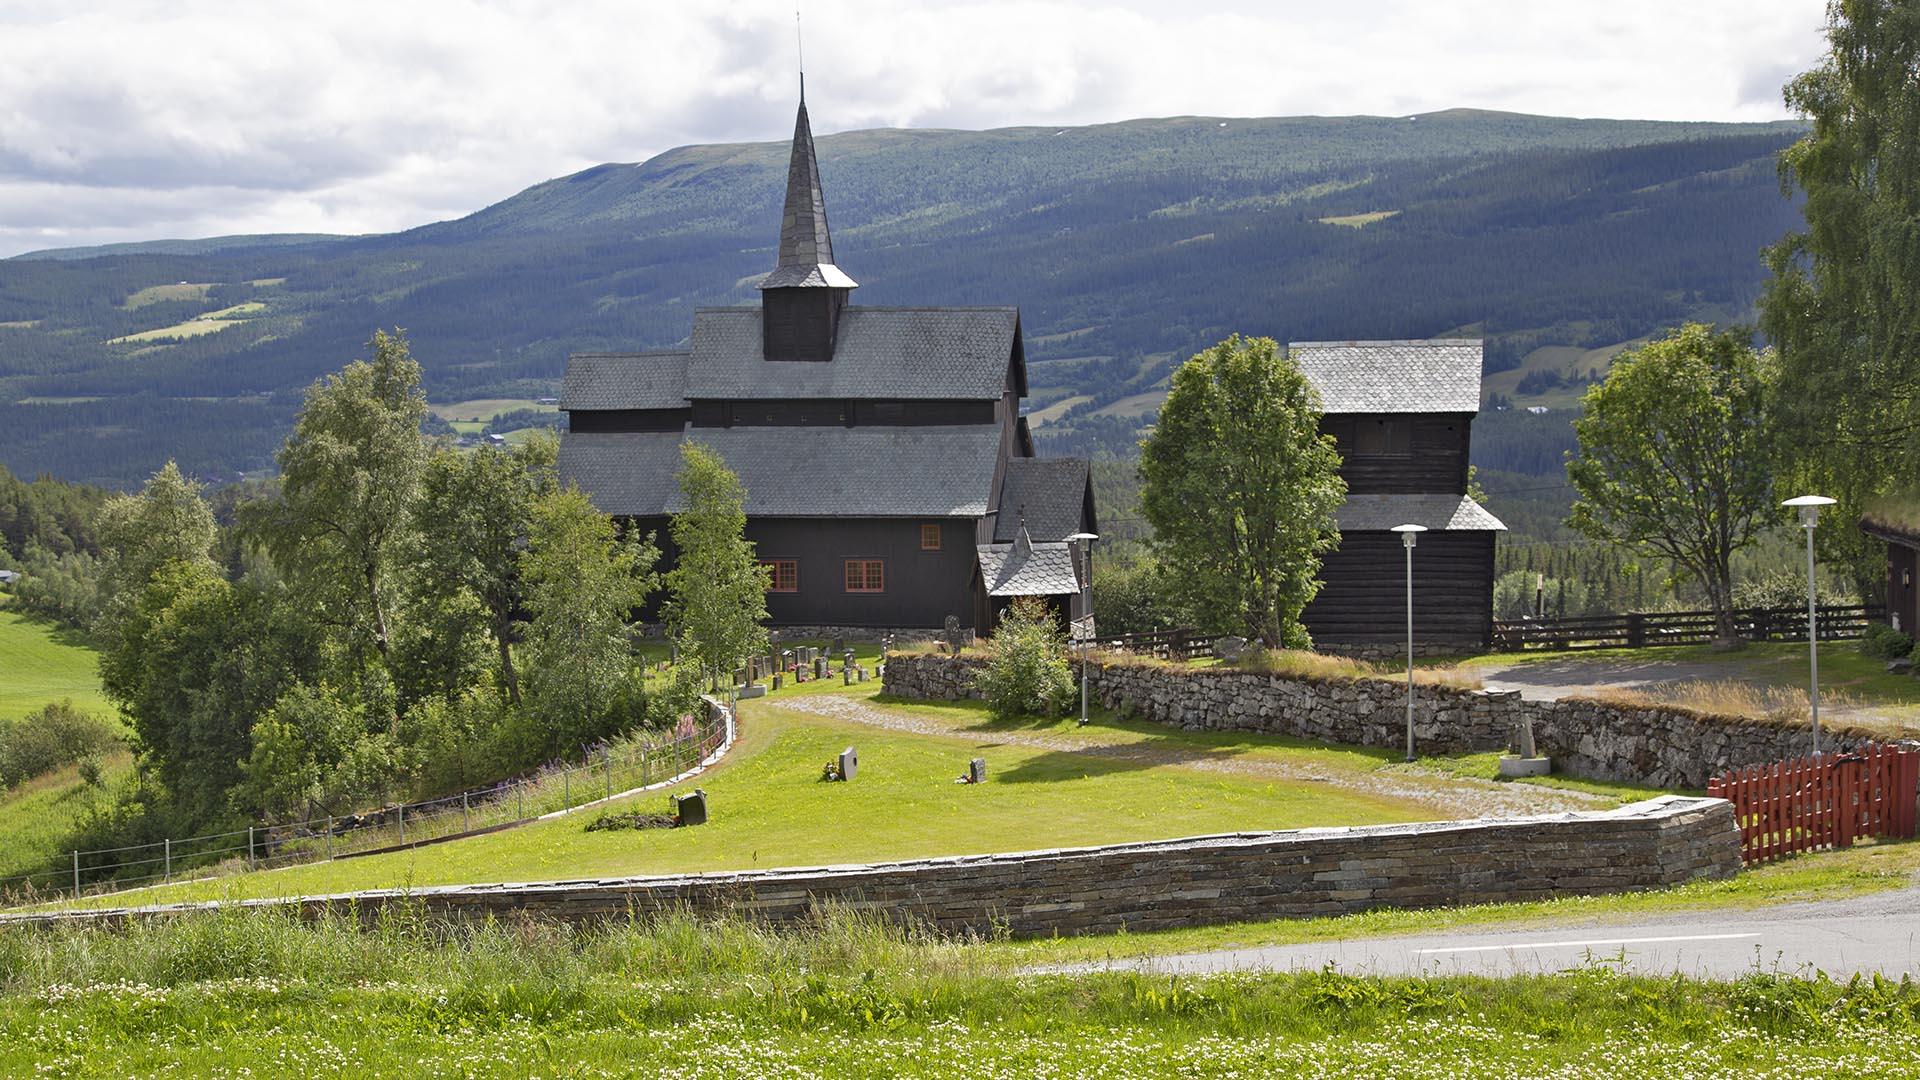 Tar colored stave church surrounded by green trees and grass.